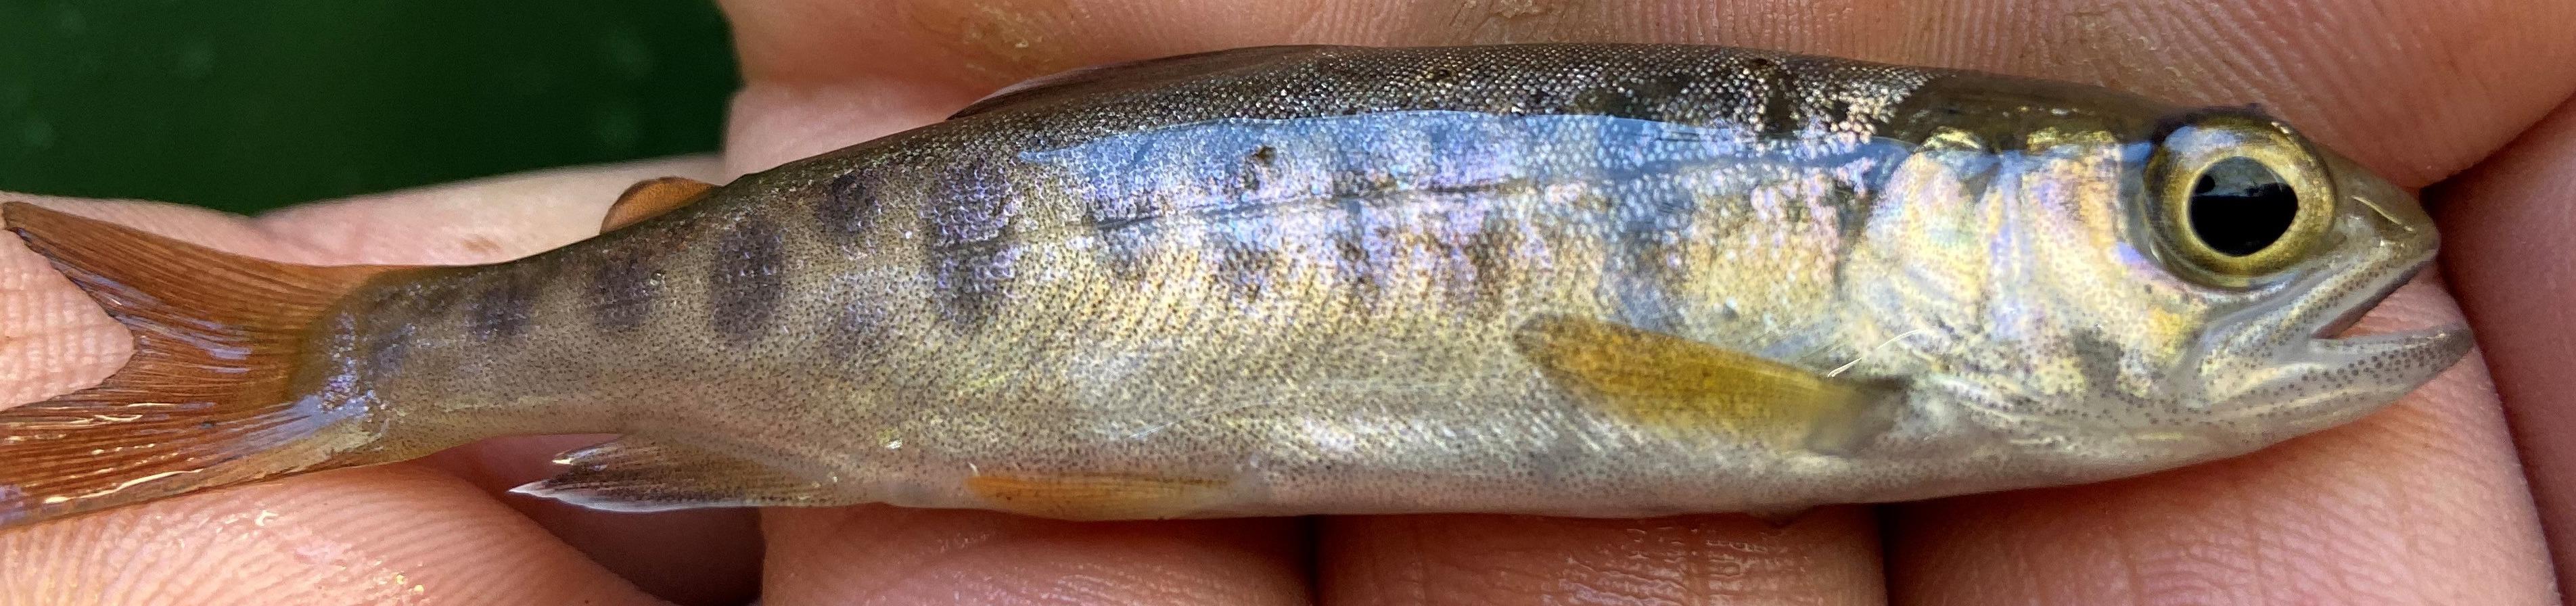 Juvenile coho salmon sampled in Lagunitas Creek, fish fits in the hand of sampler and is marked by orangeish fins with dark bars on the body